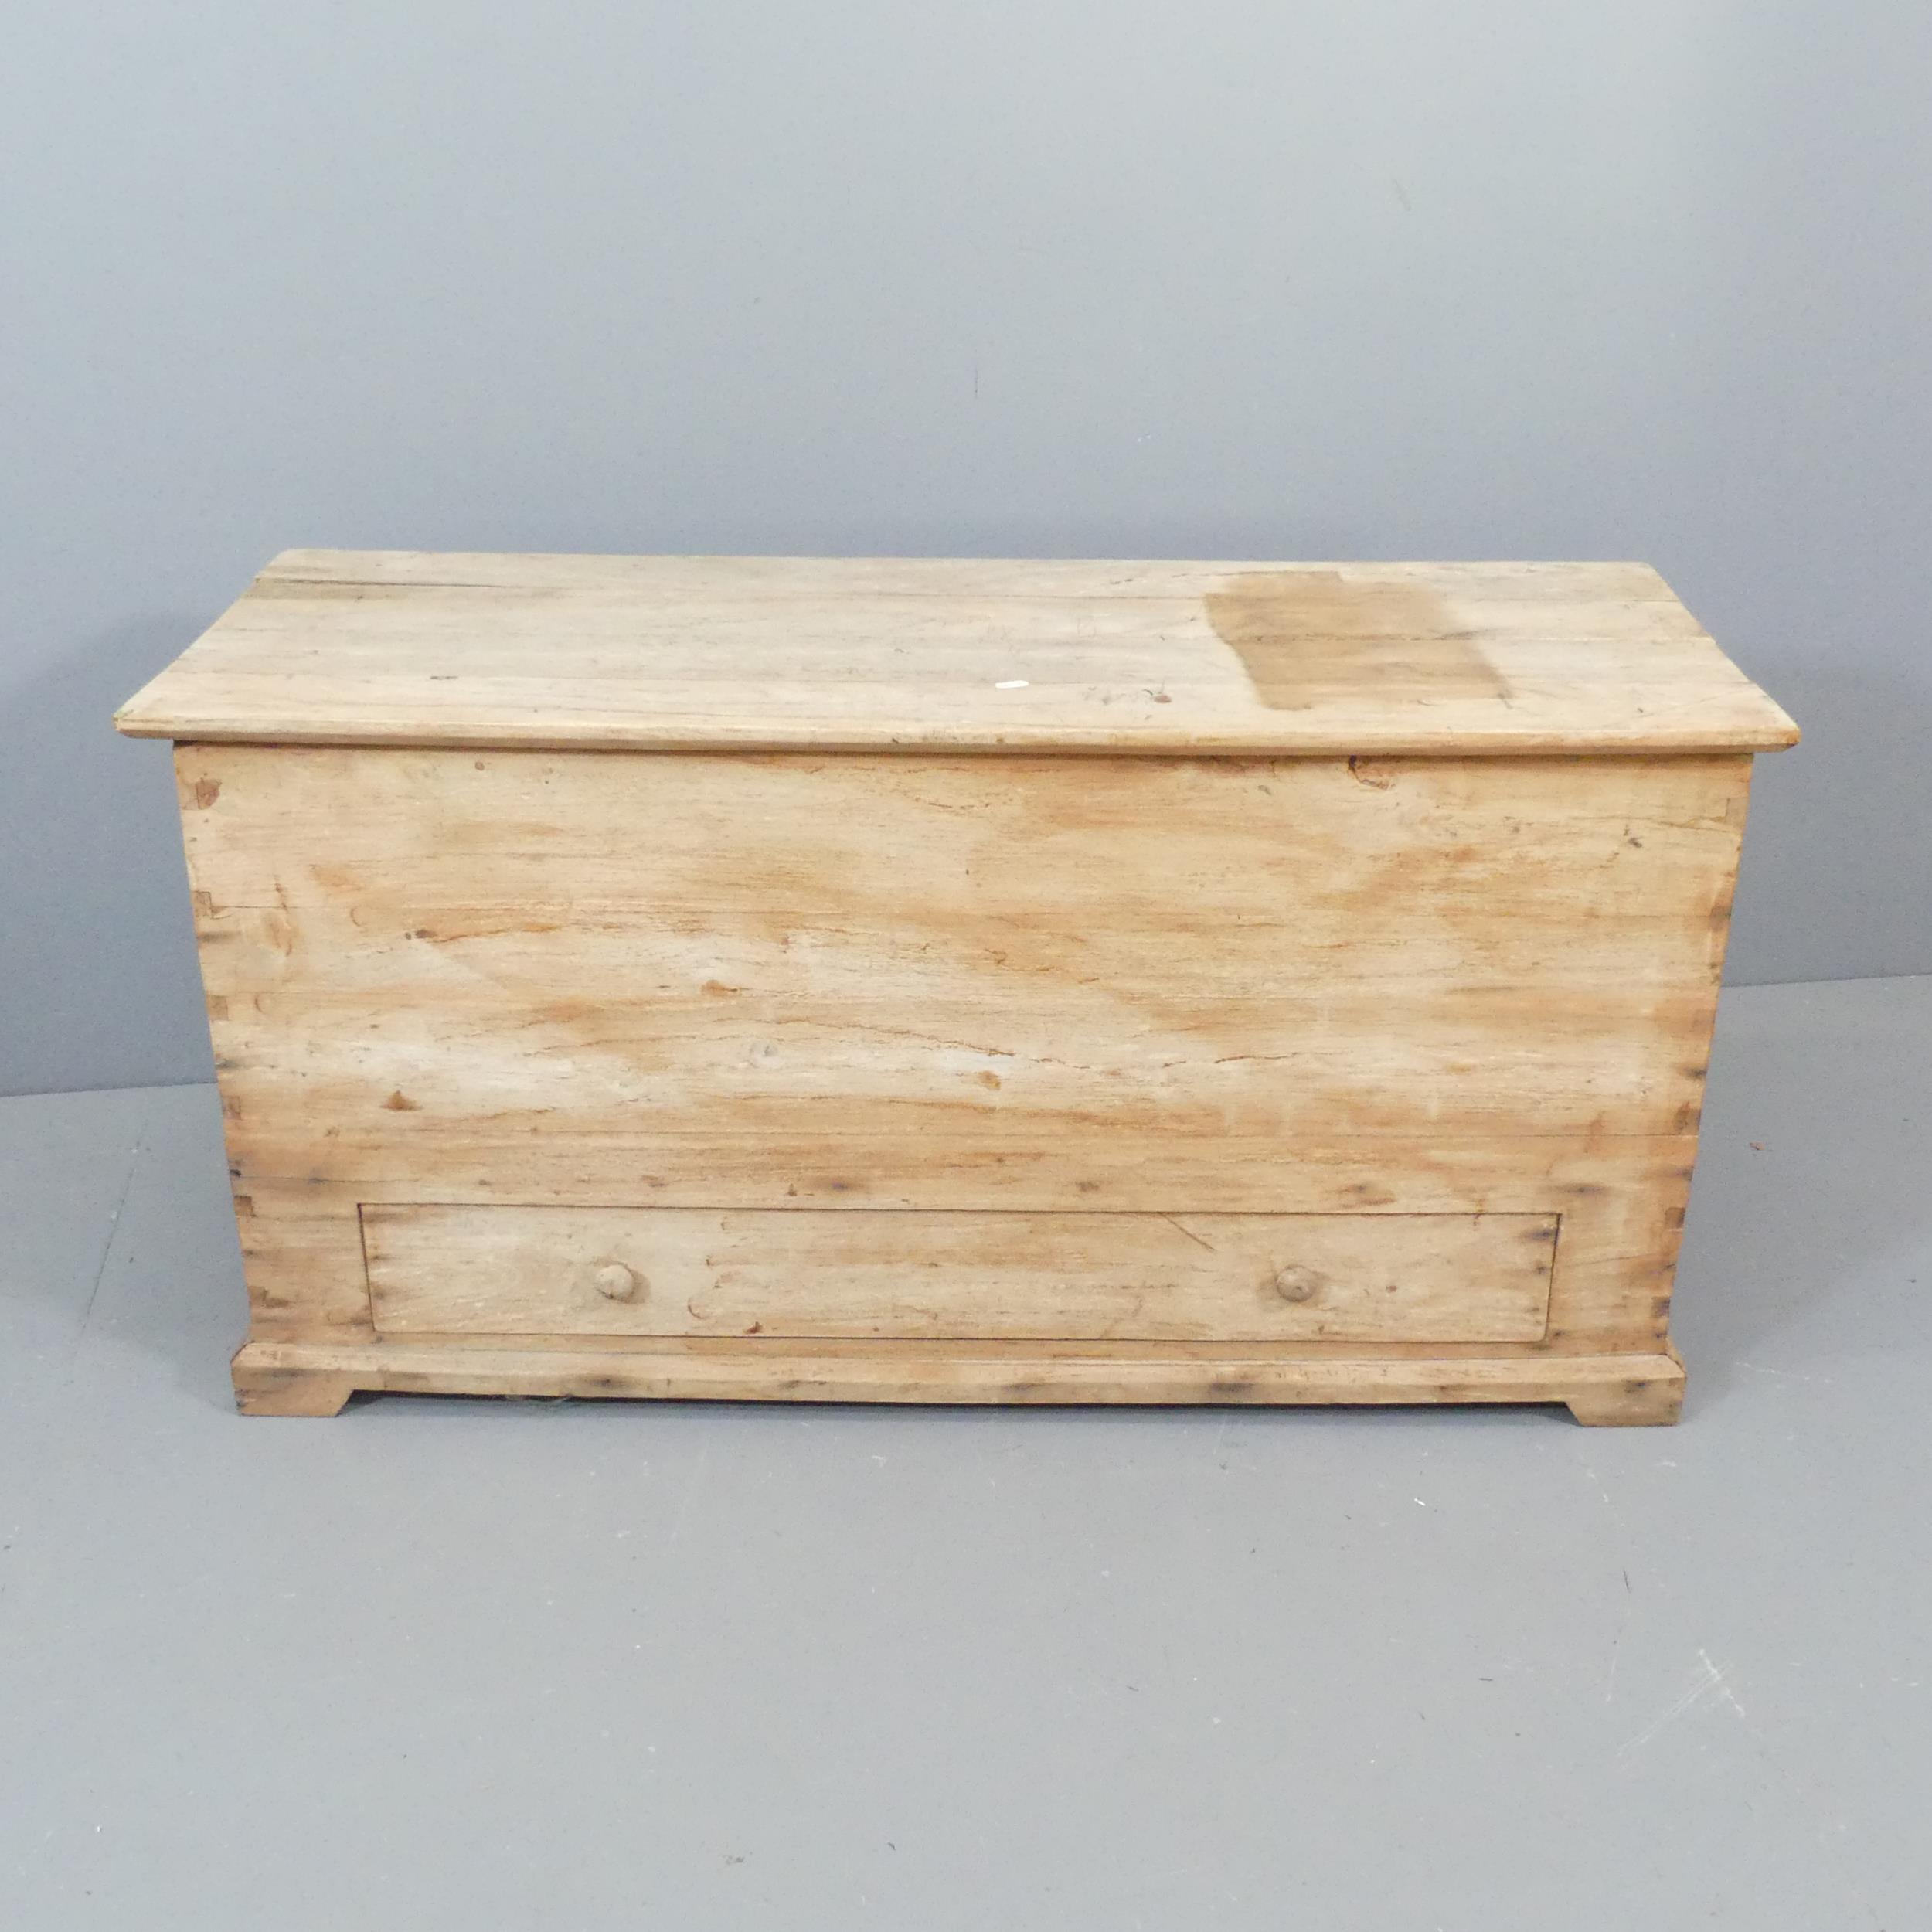 A modern cedar wood blanket box, with lifting lid single drawer. 120x60x46cm. Appears to have been